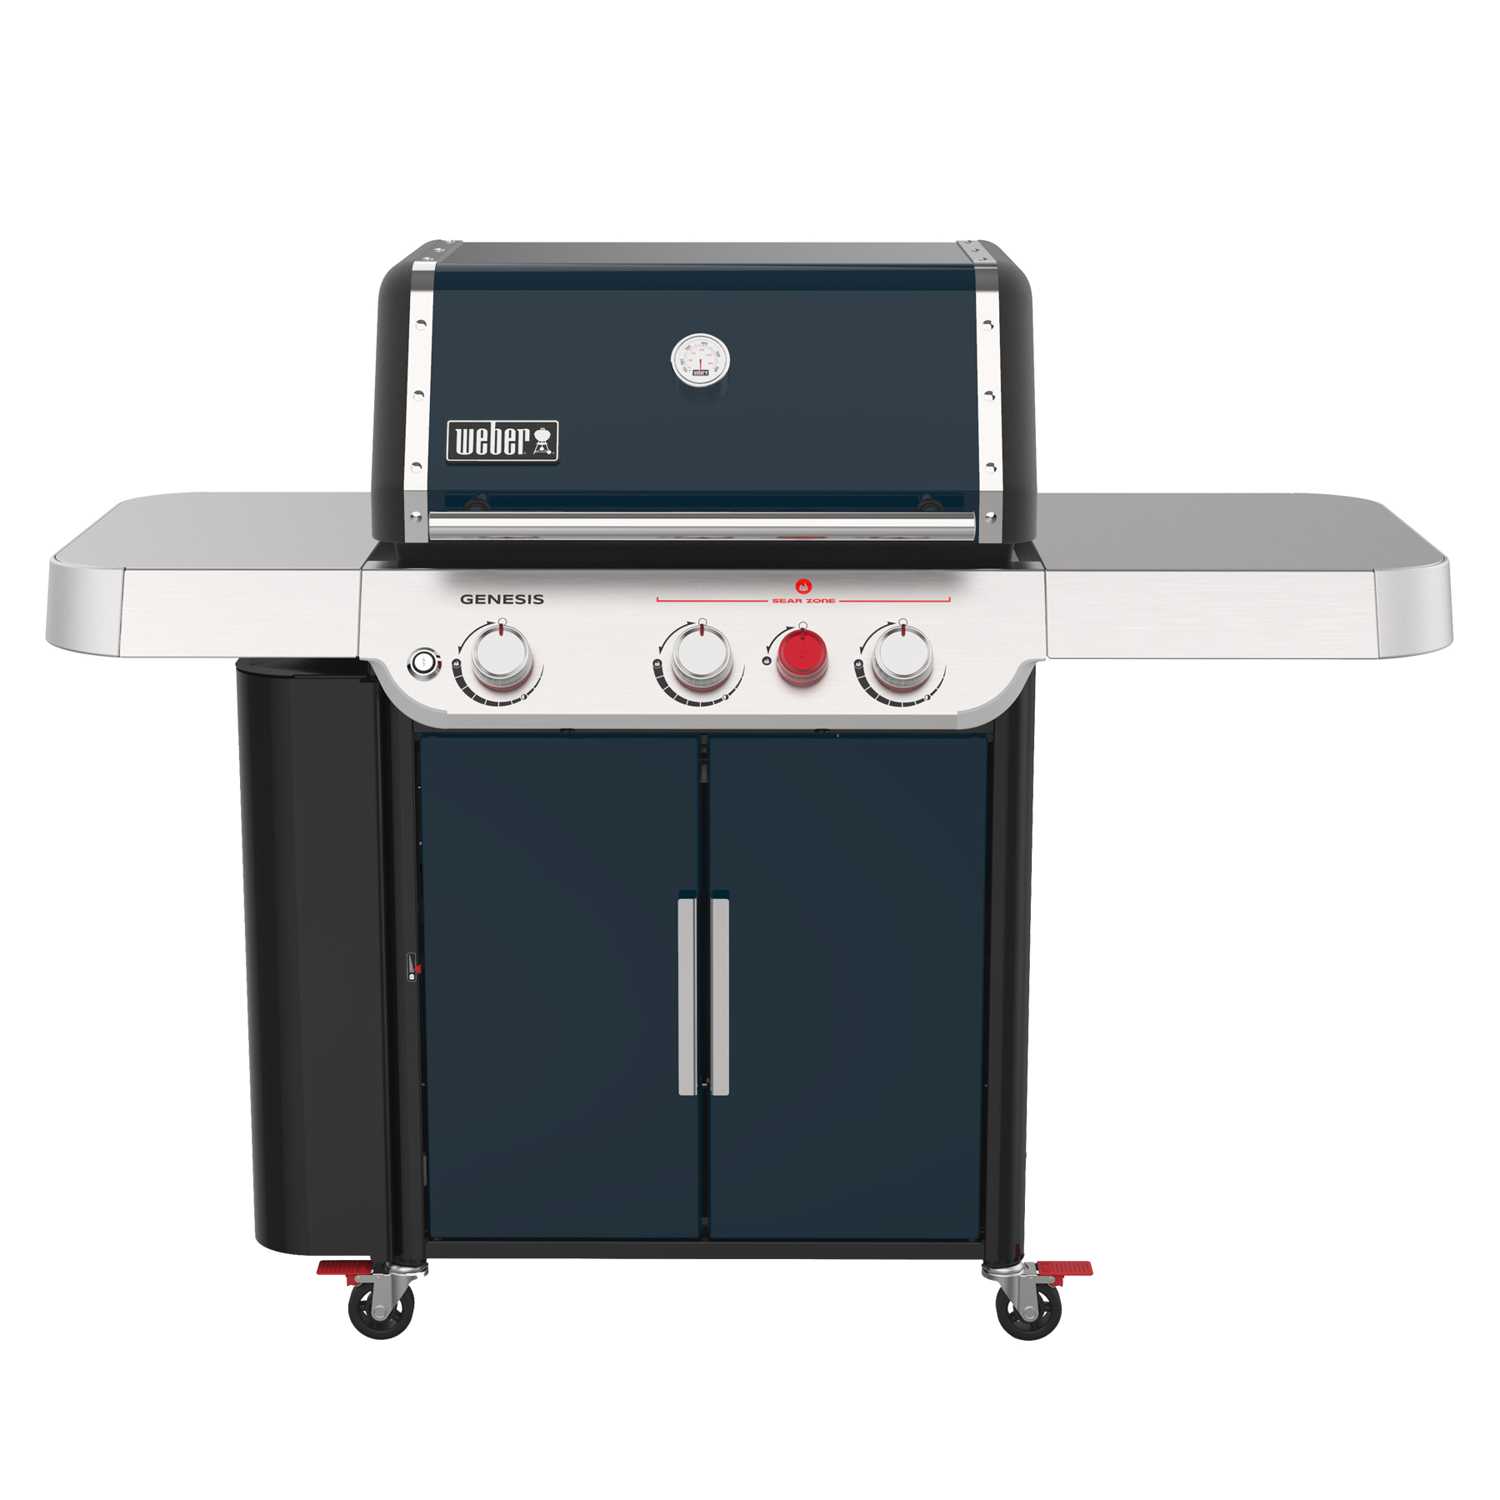 II. Benefits of Char-Broil Grills